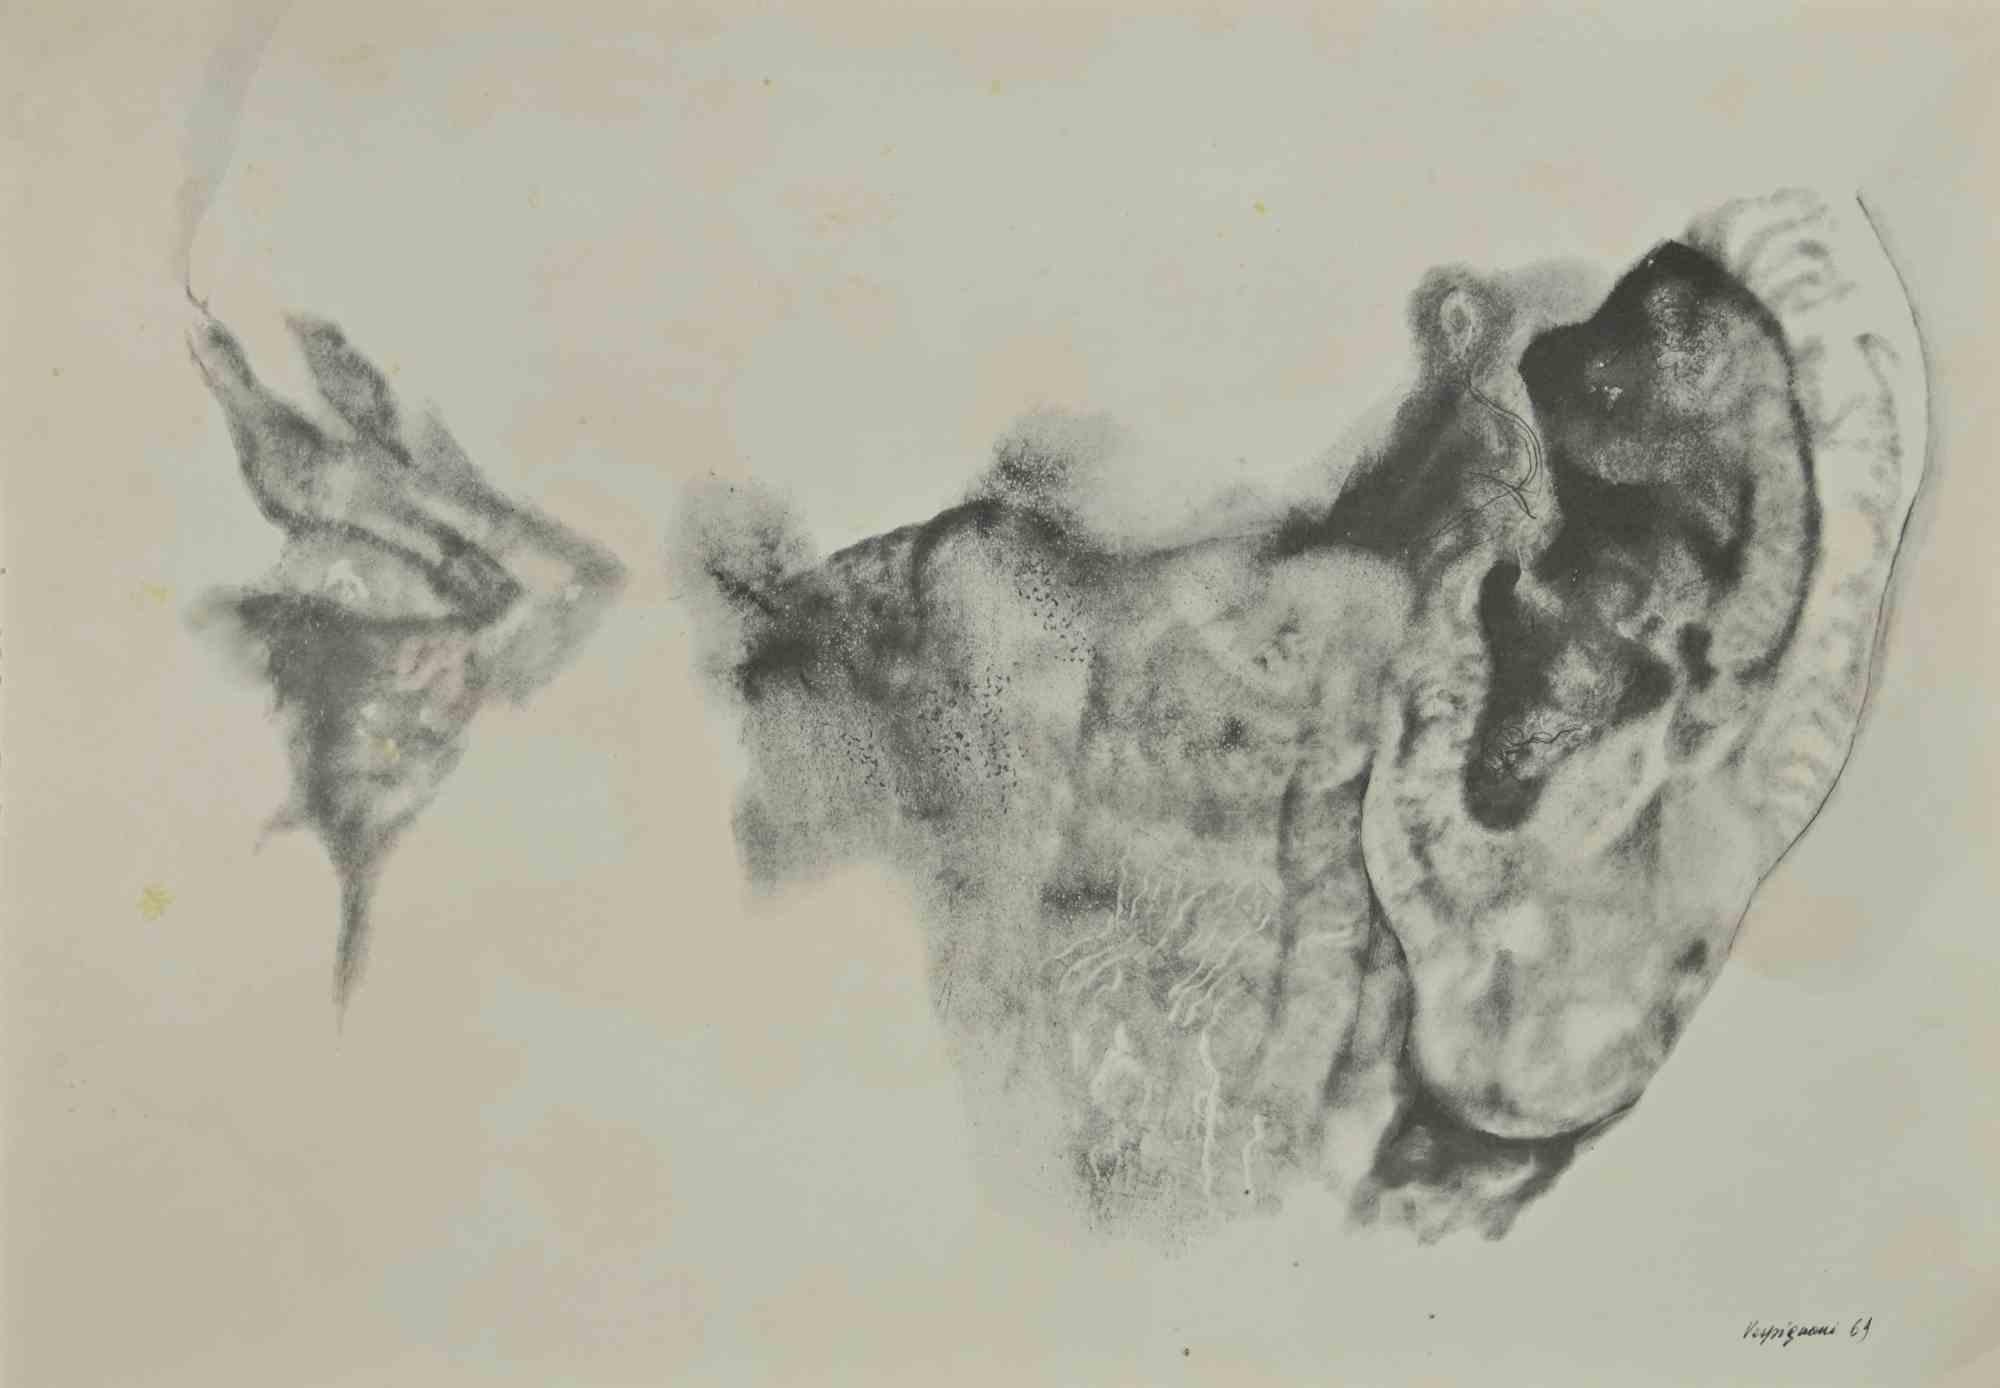 The Ears is a phototype print reproducing drawing by Renzo Vespignani of the 1960s

Signed on the plate lower right.

The artwork is depicted through strong strokes and perfect hatchings.